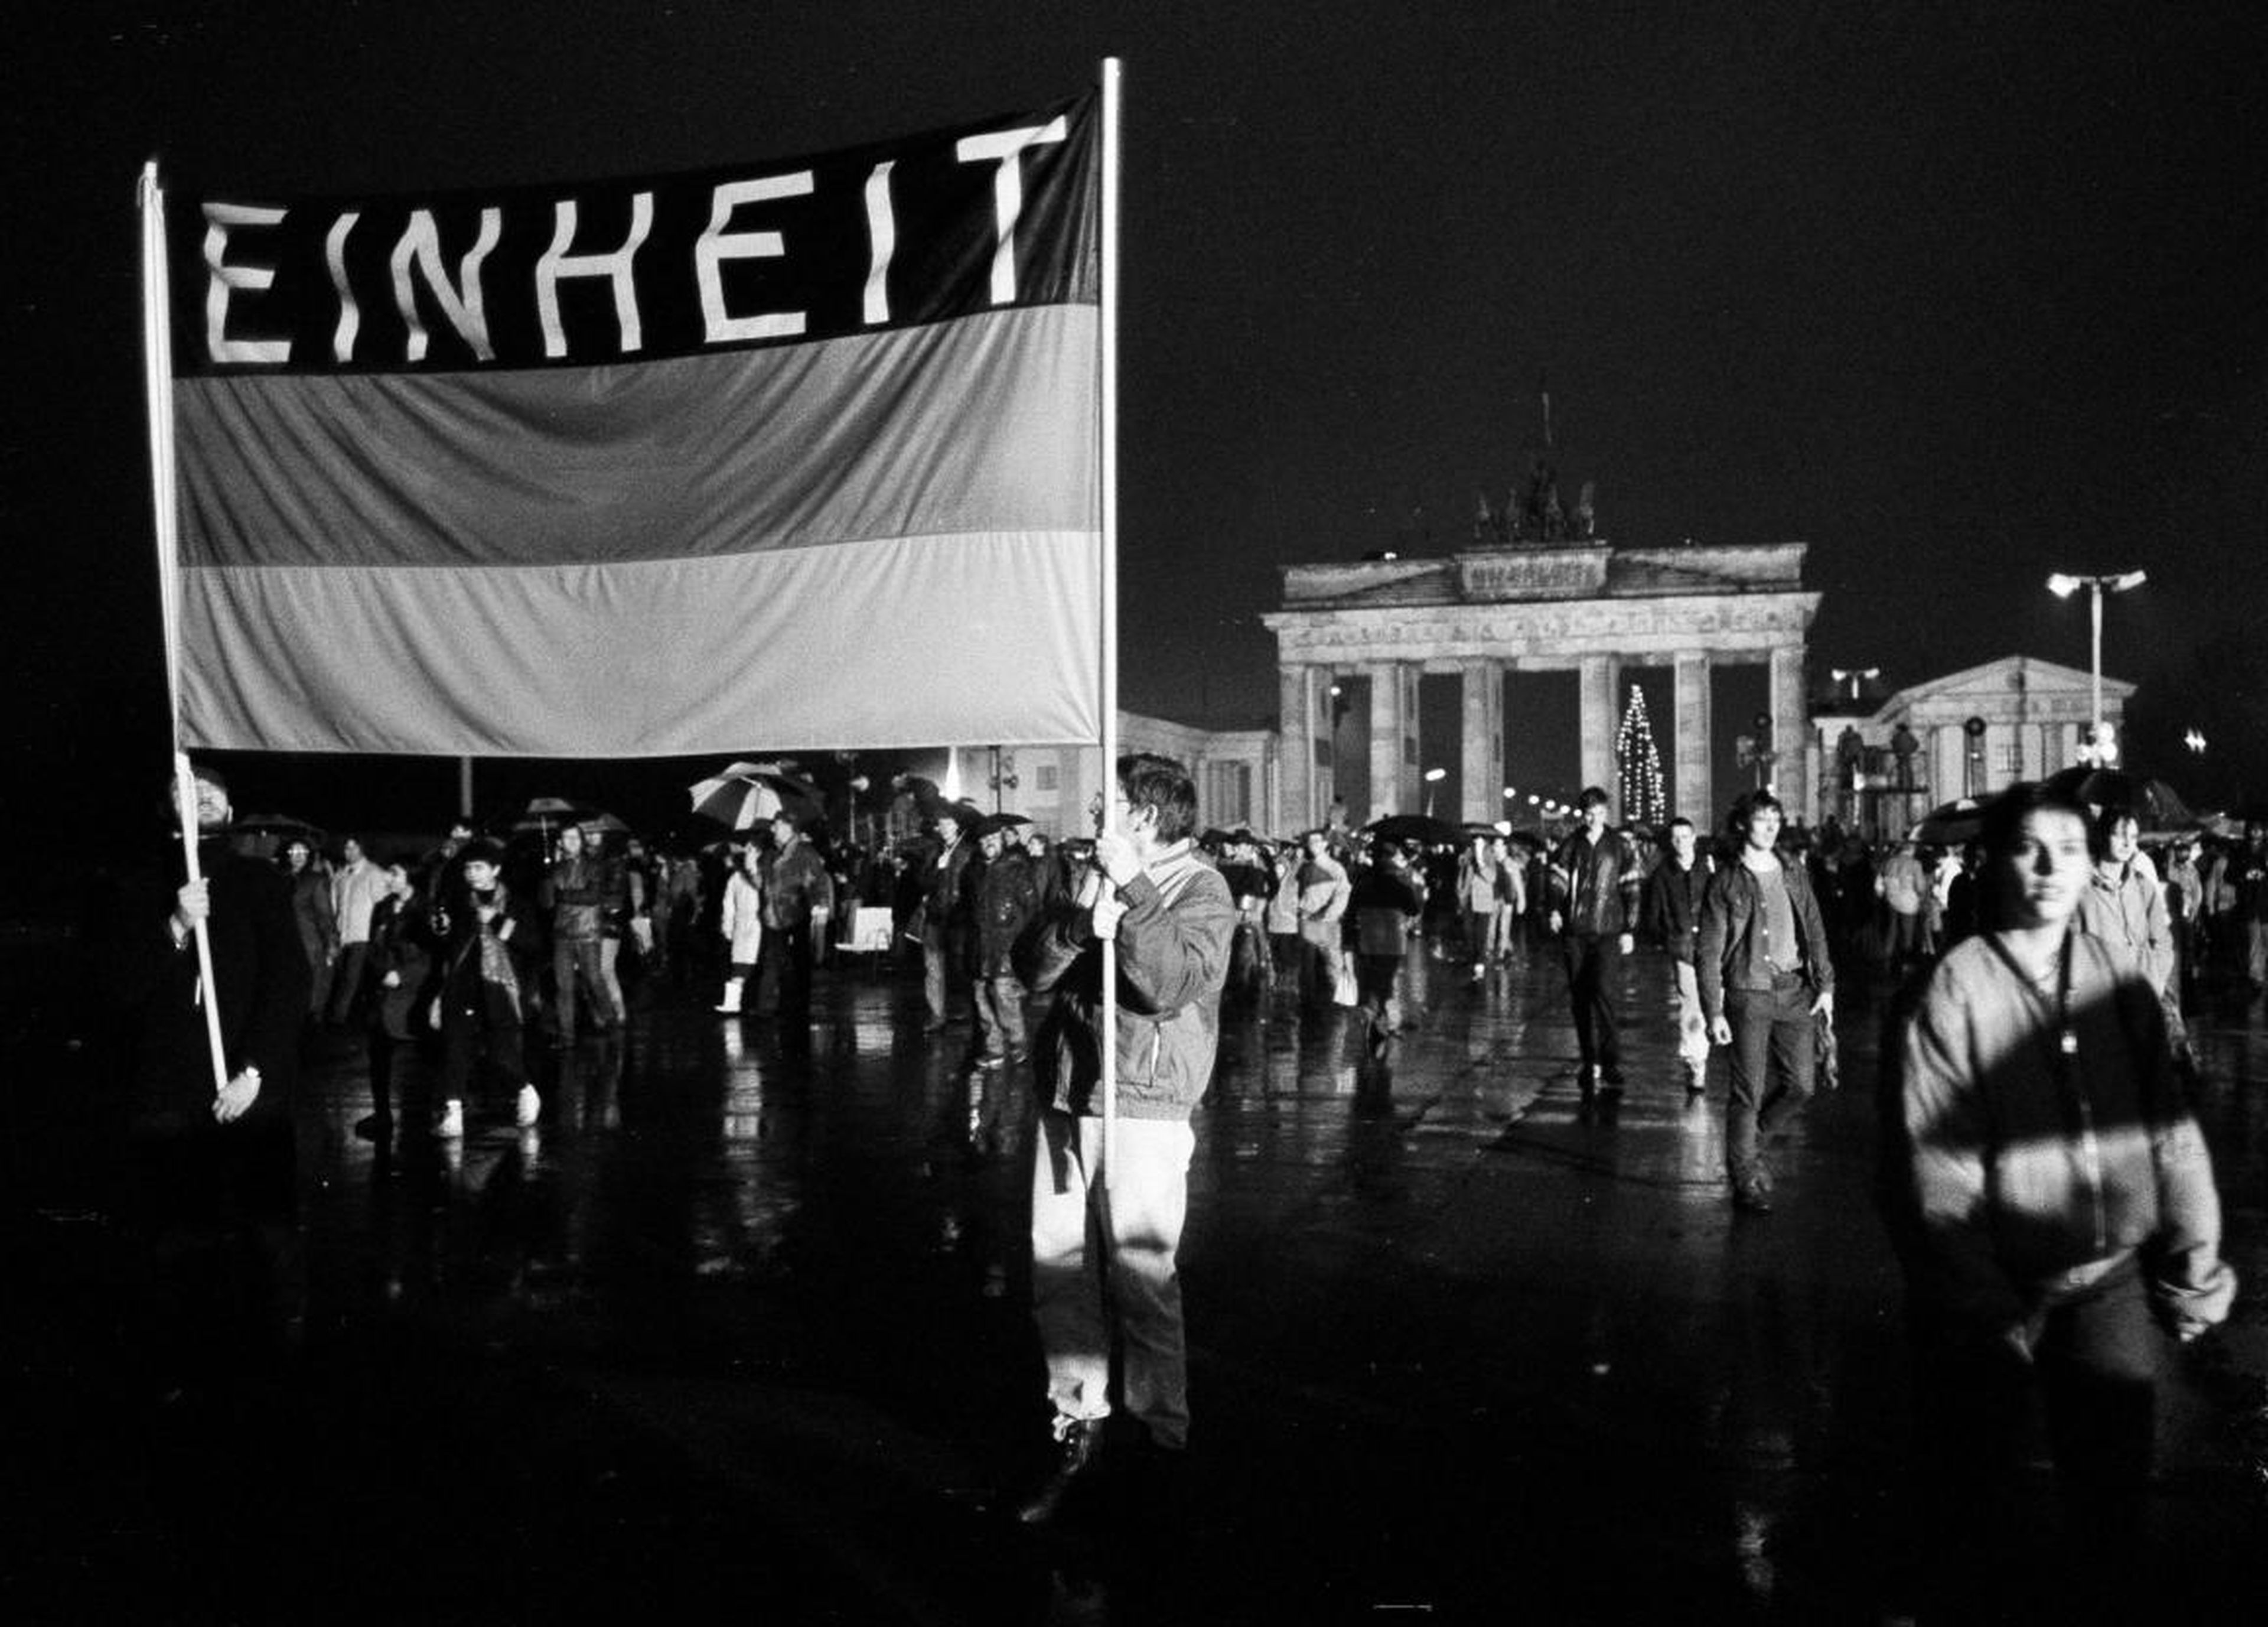 This flag reading "Unity" was waved high as these Germans crossed the newly opened border December 22.